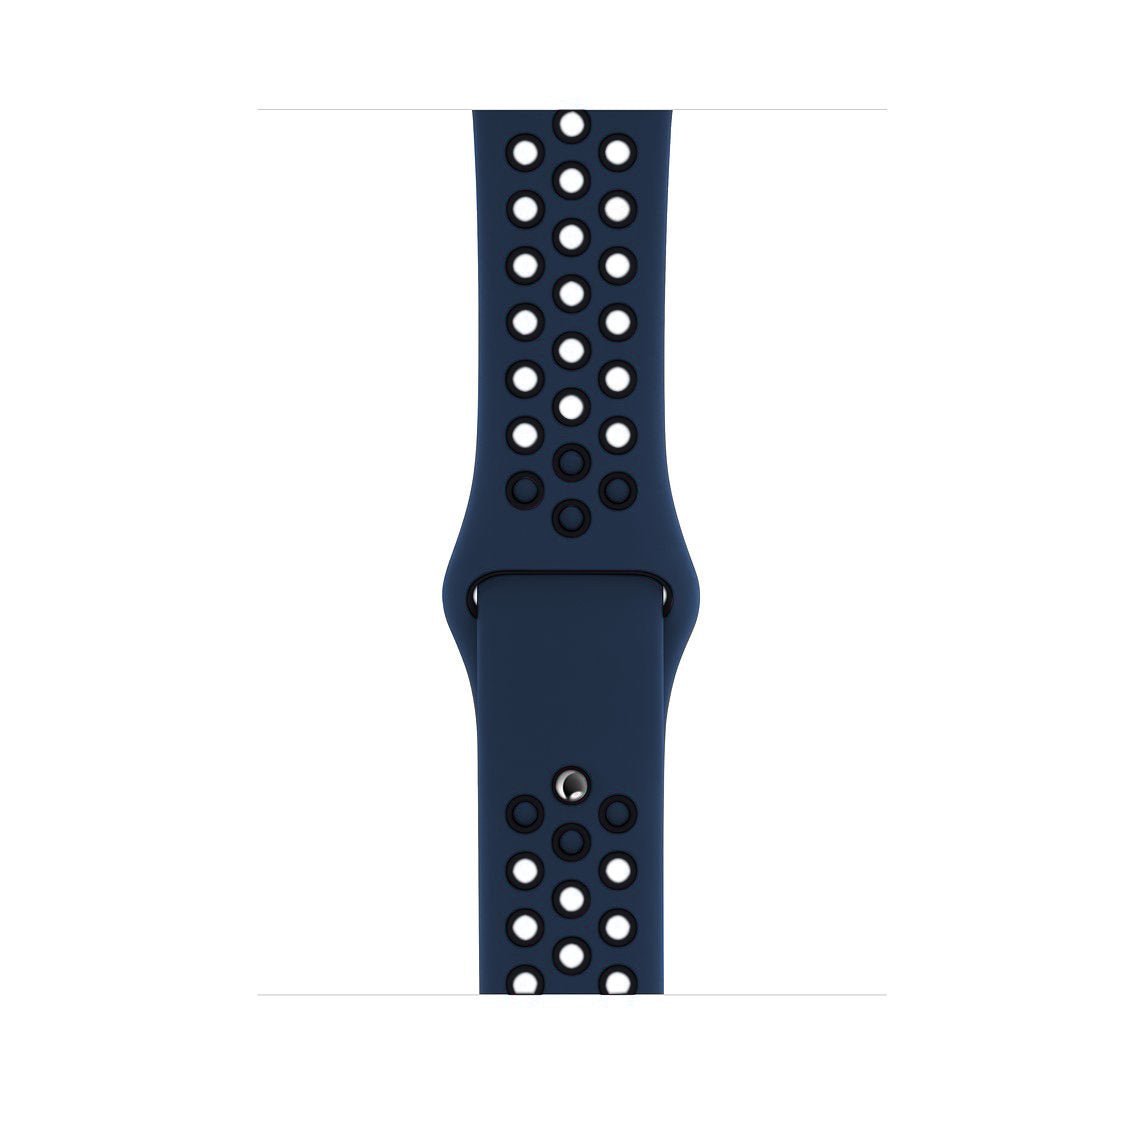 Midnight Blue/Black Silicone Sport Strap for Apple Watch Silicone Bands   Accessories Gifts UK